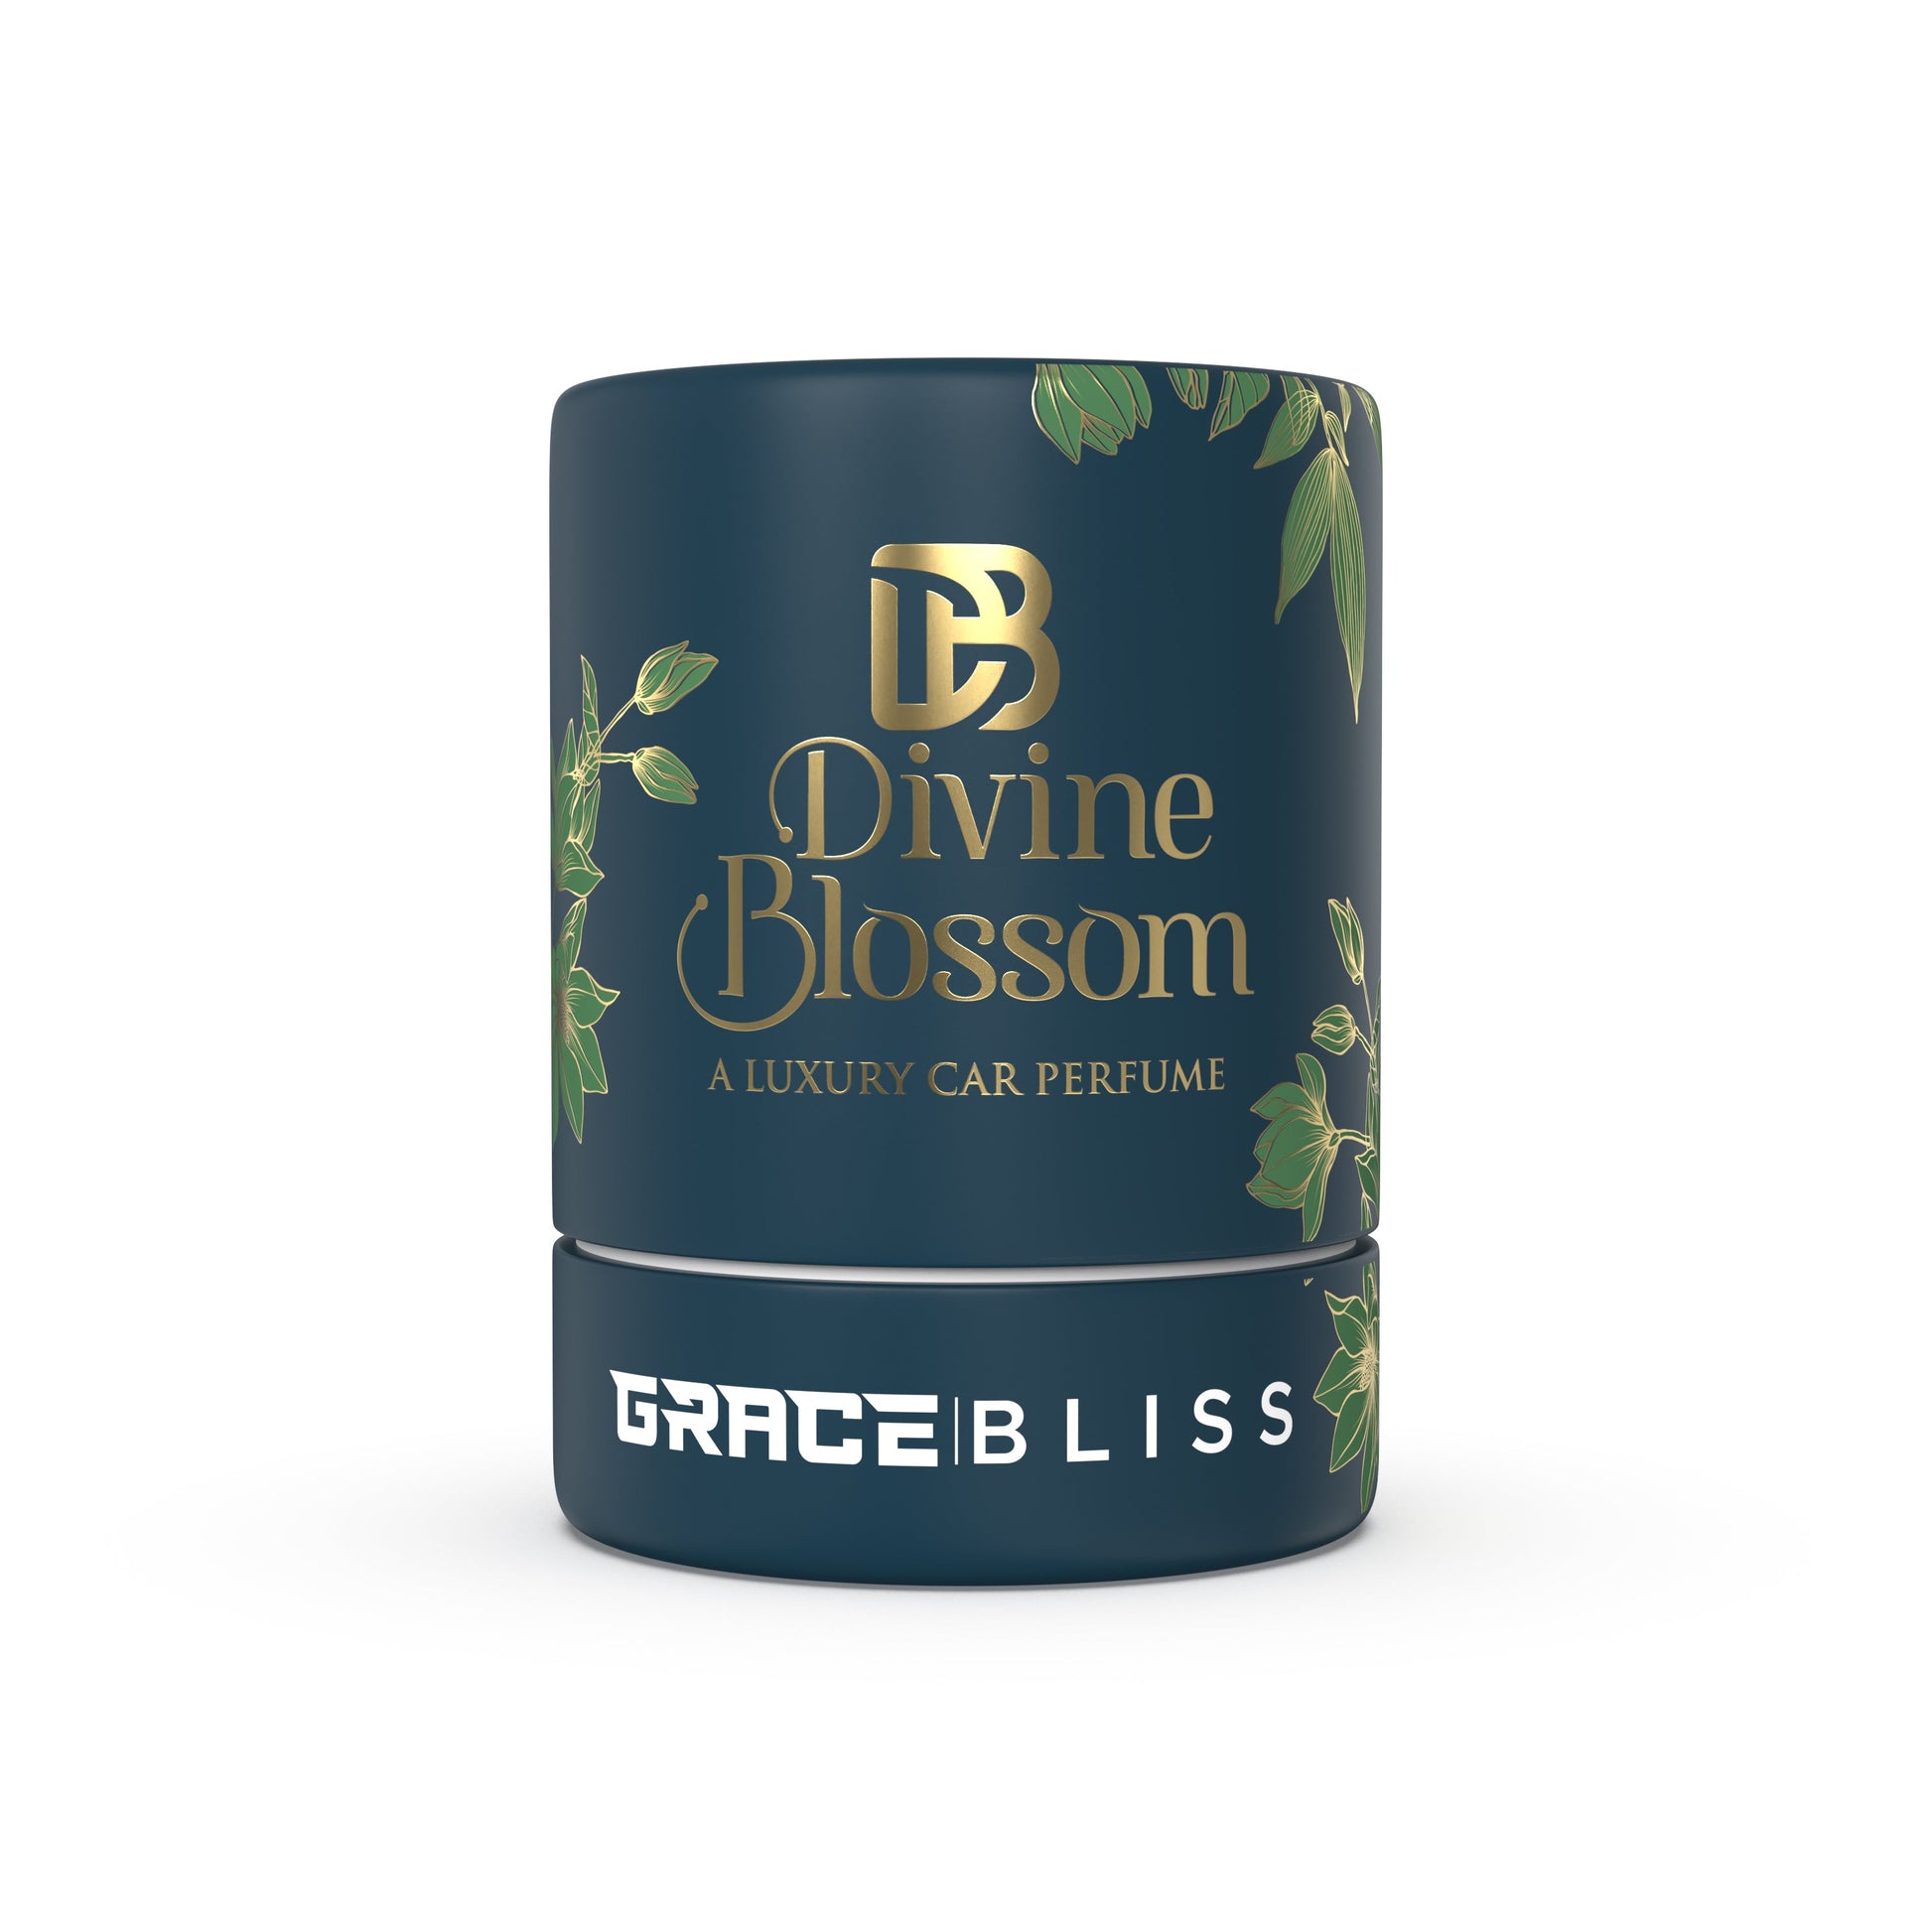 BLISS GEL CAN DivineBlossom